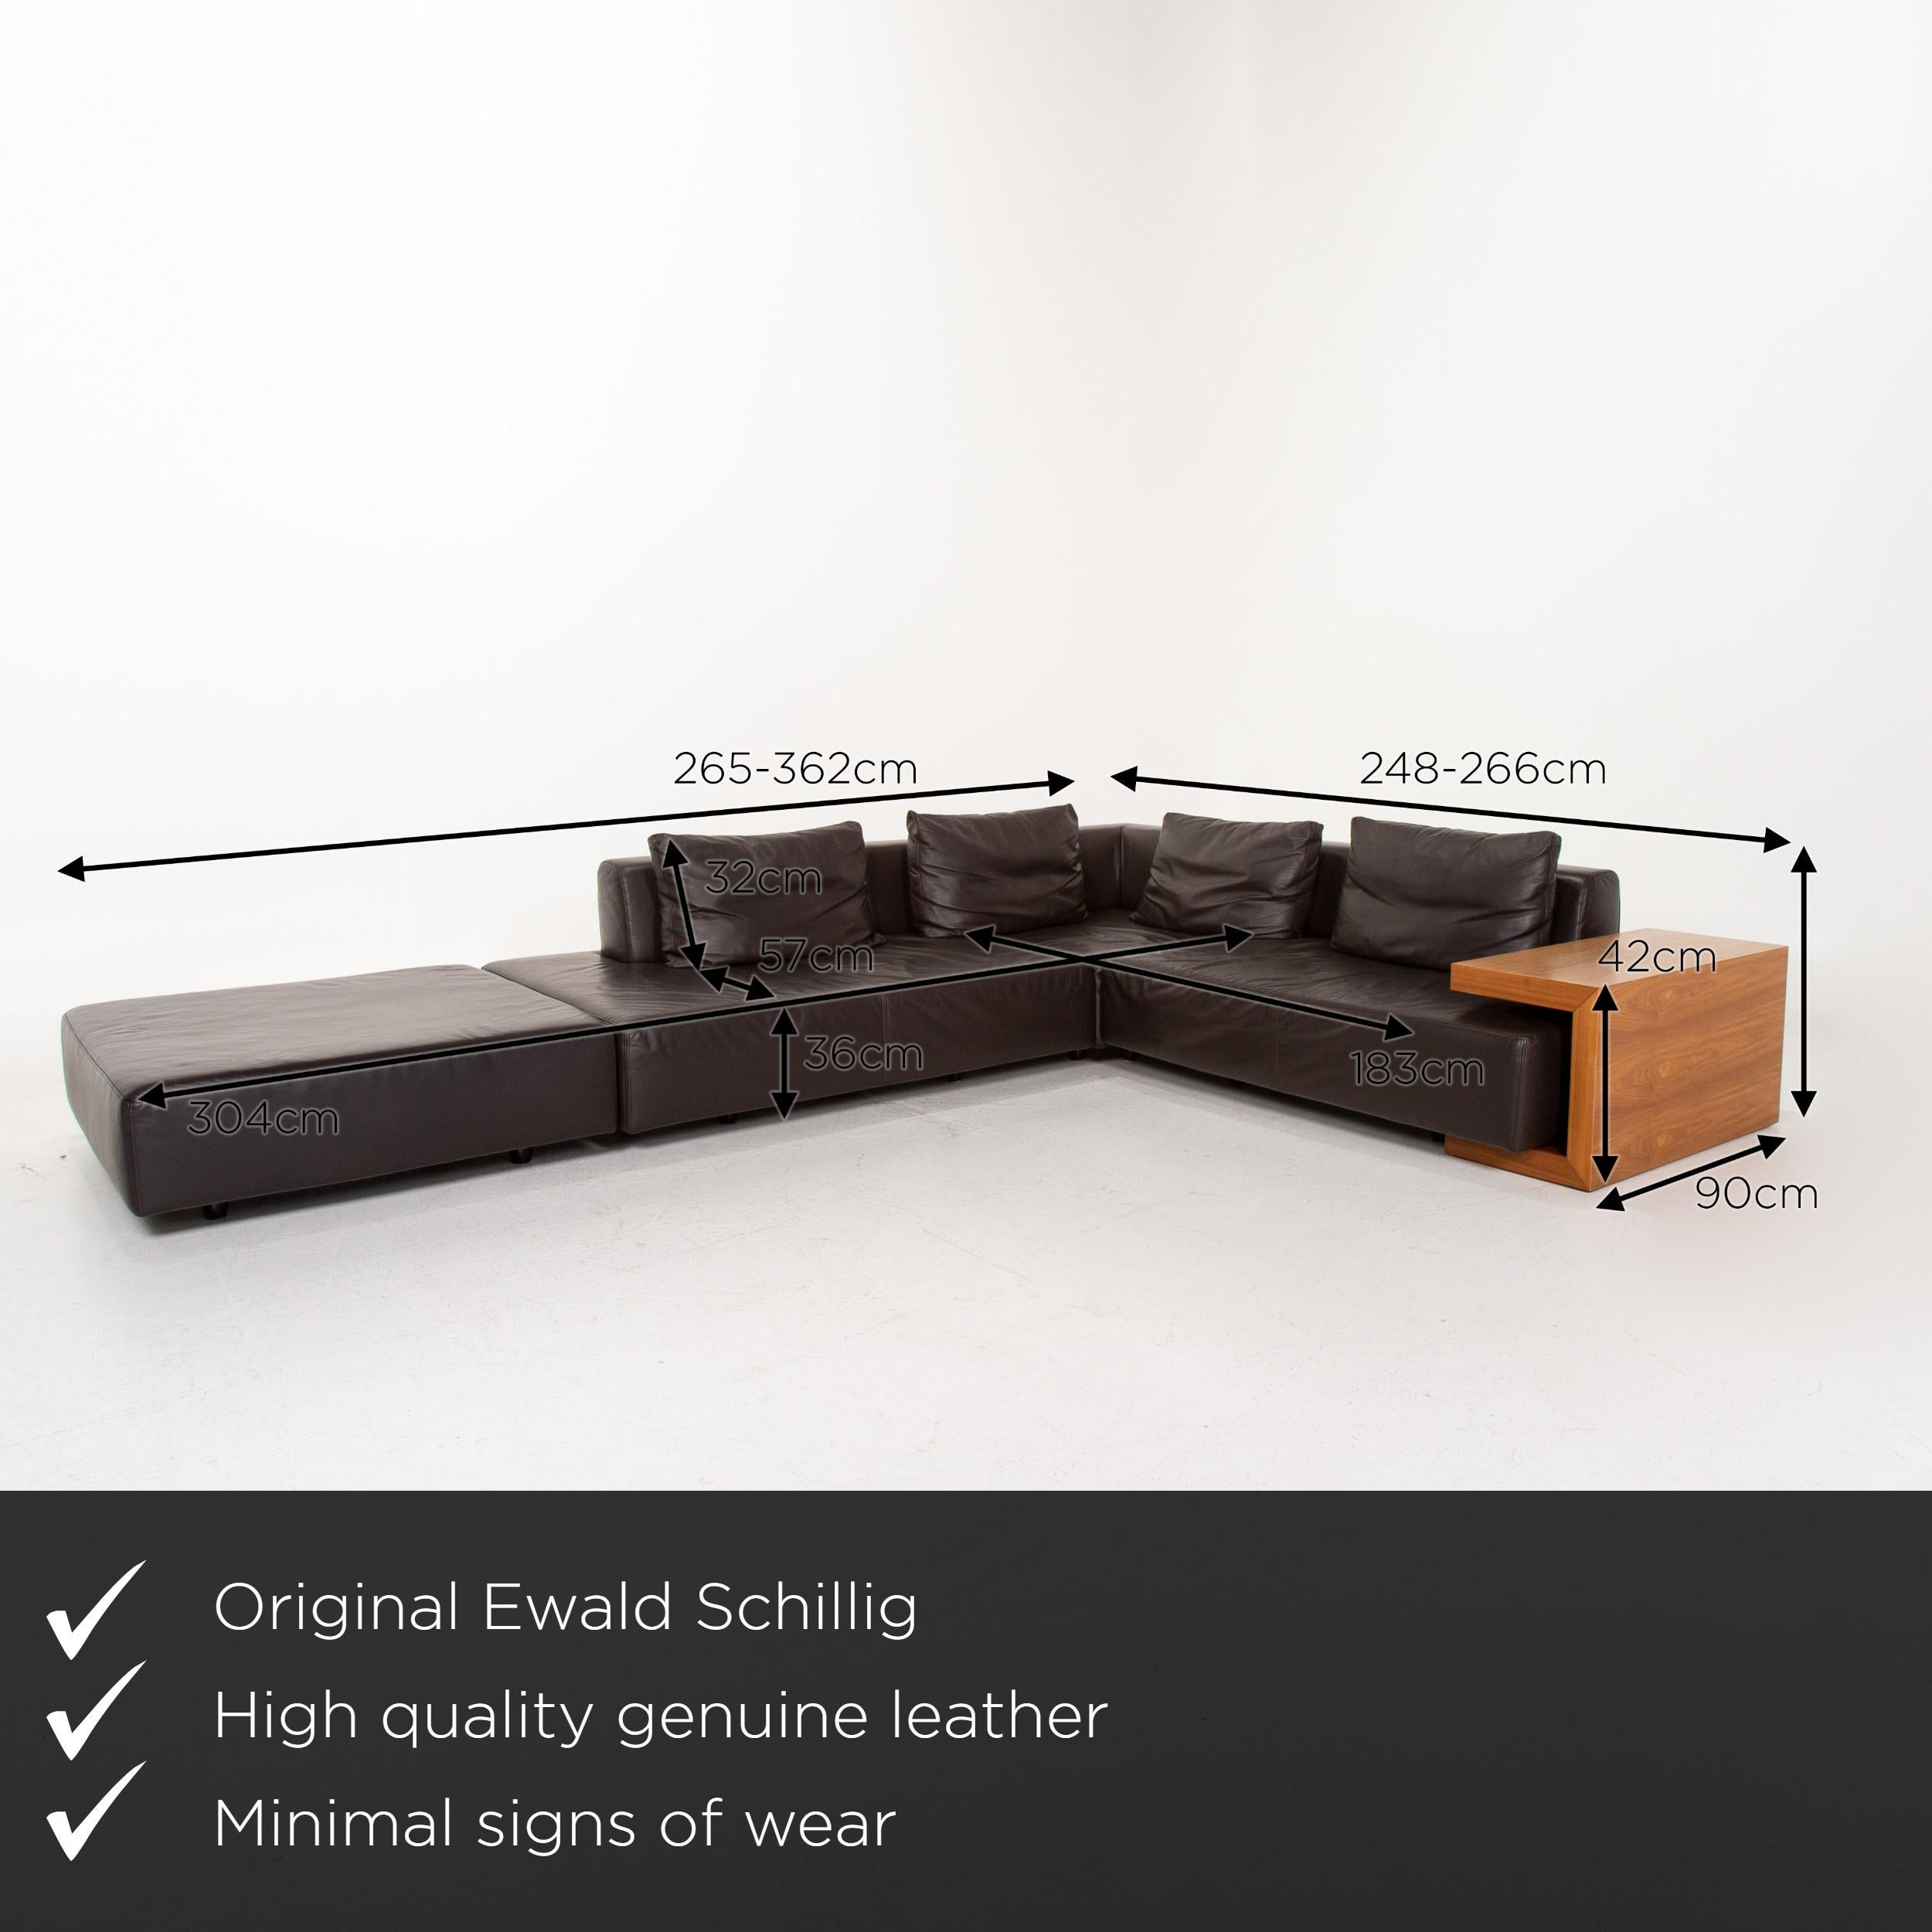 We present to you an Ewald Schillig leather corner sofa incl. Wood side table modular sofa couch.
 
 

 Product measurements in centimeters:
 

Depth 106
Width 362
Height 65
Seat height 36
Rest height
Seat depth 57
Seat width 304
Back